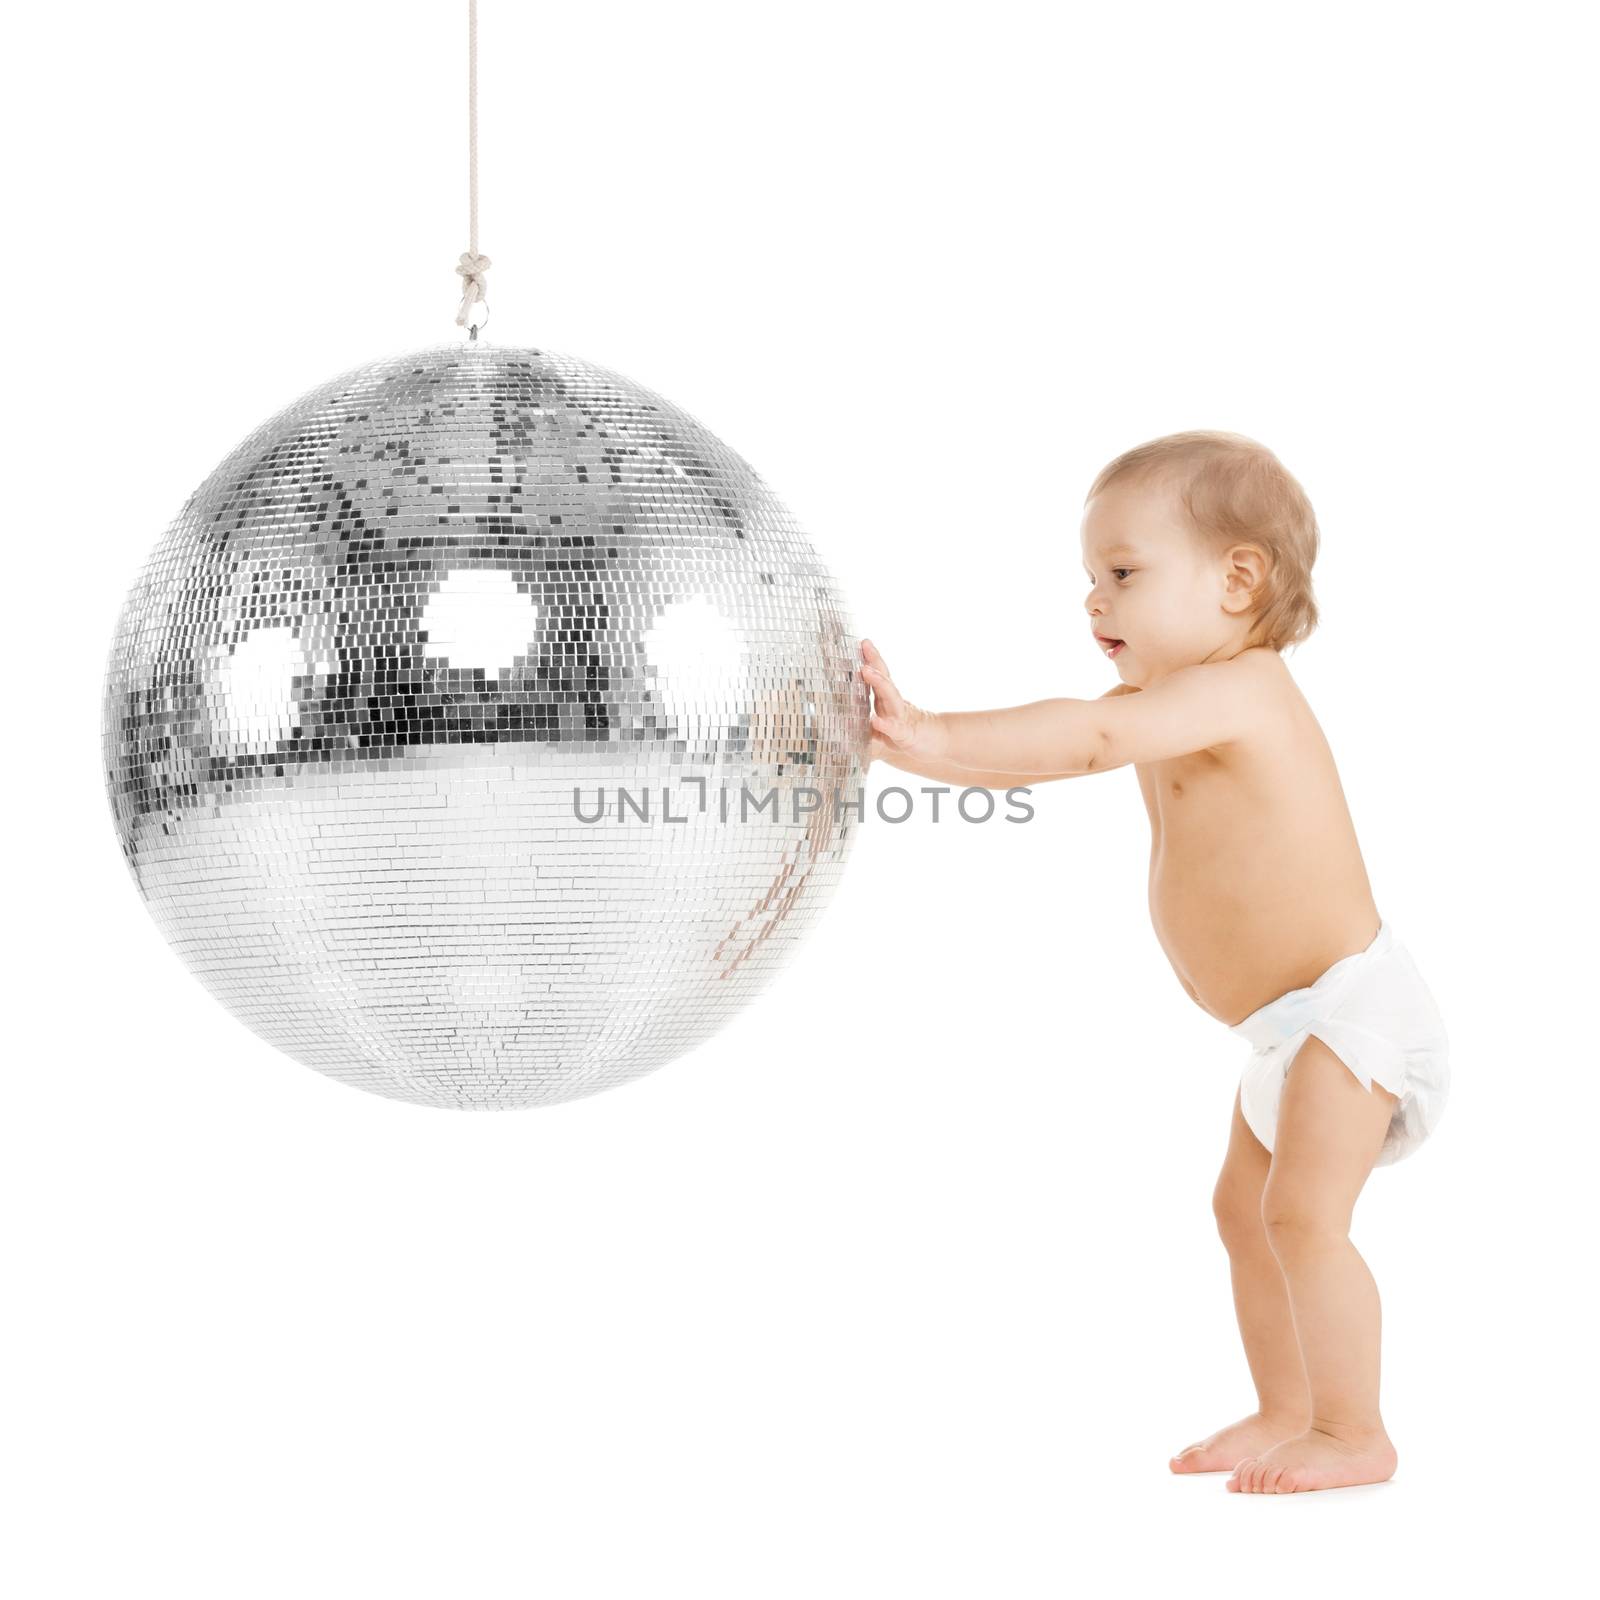 childhood and toys concept - cute little toddler playing with disco ball